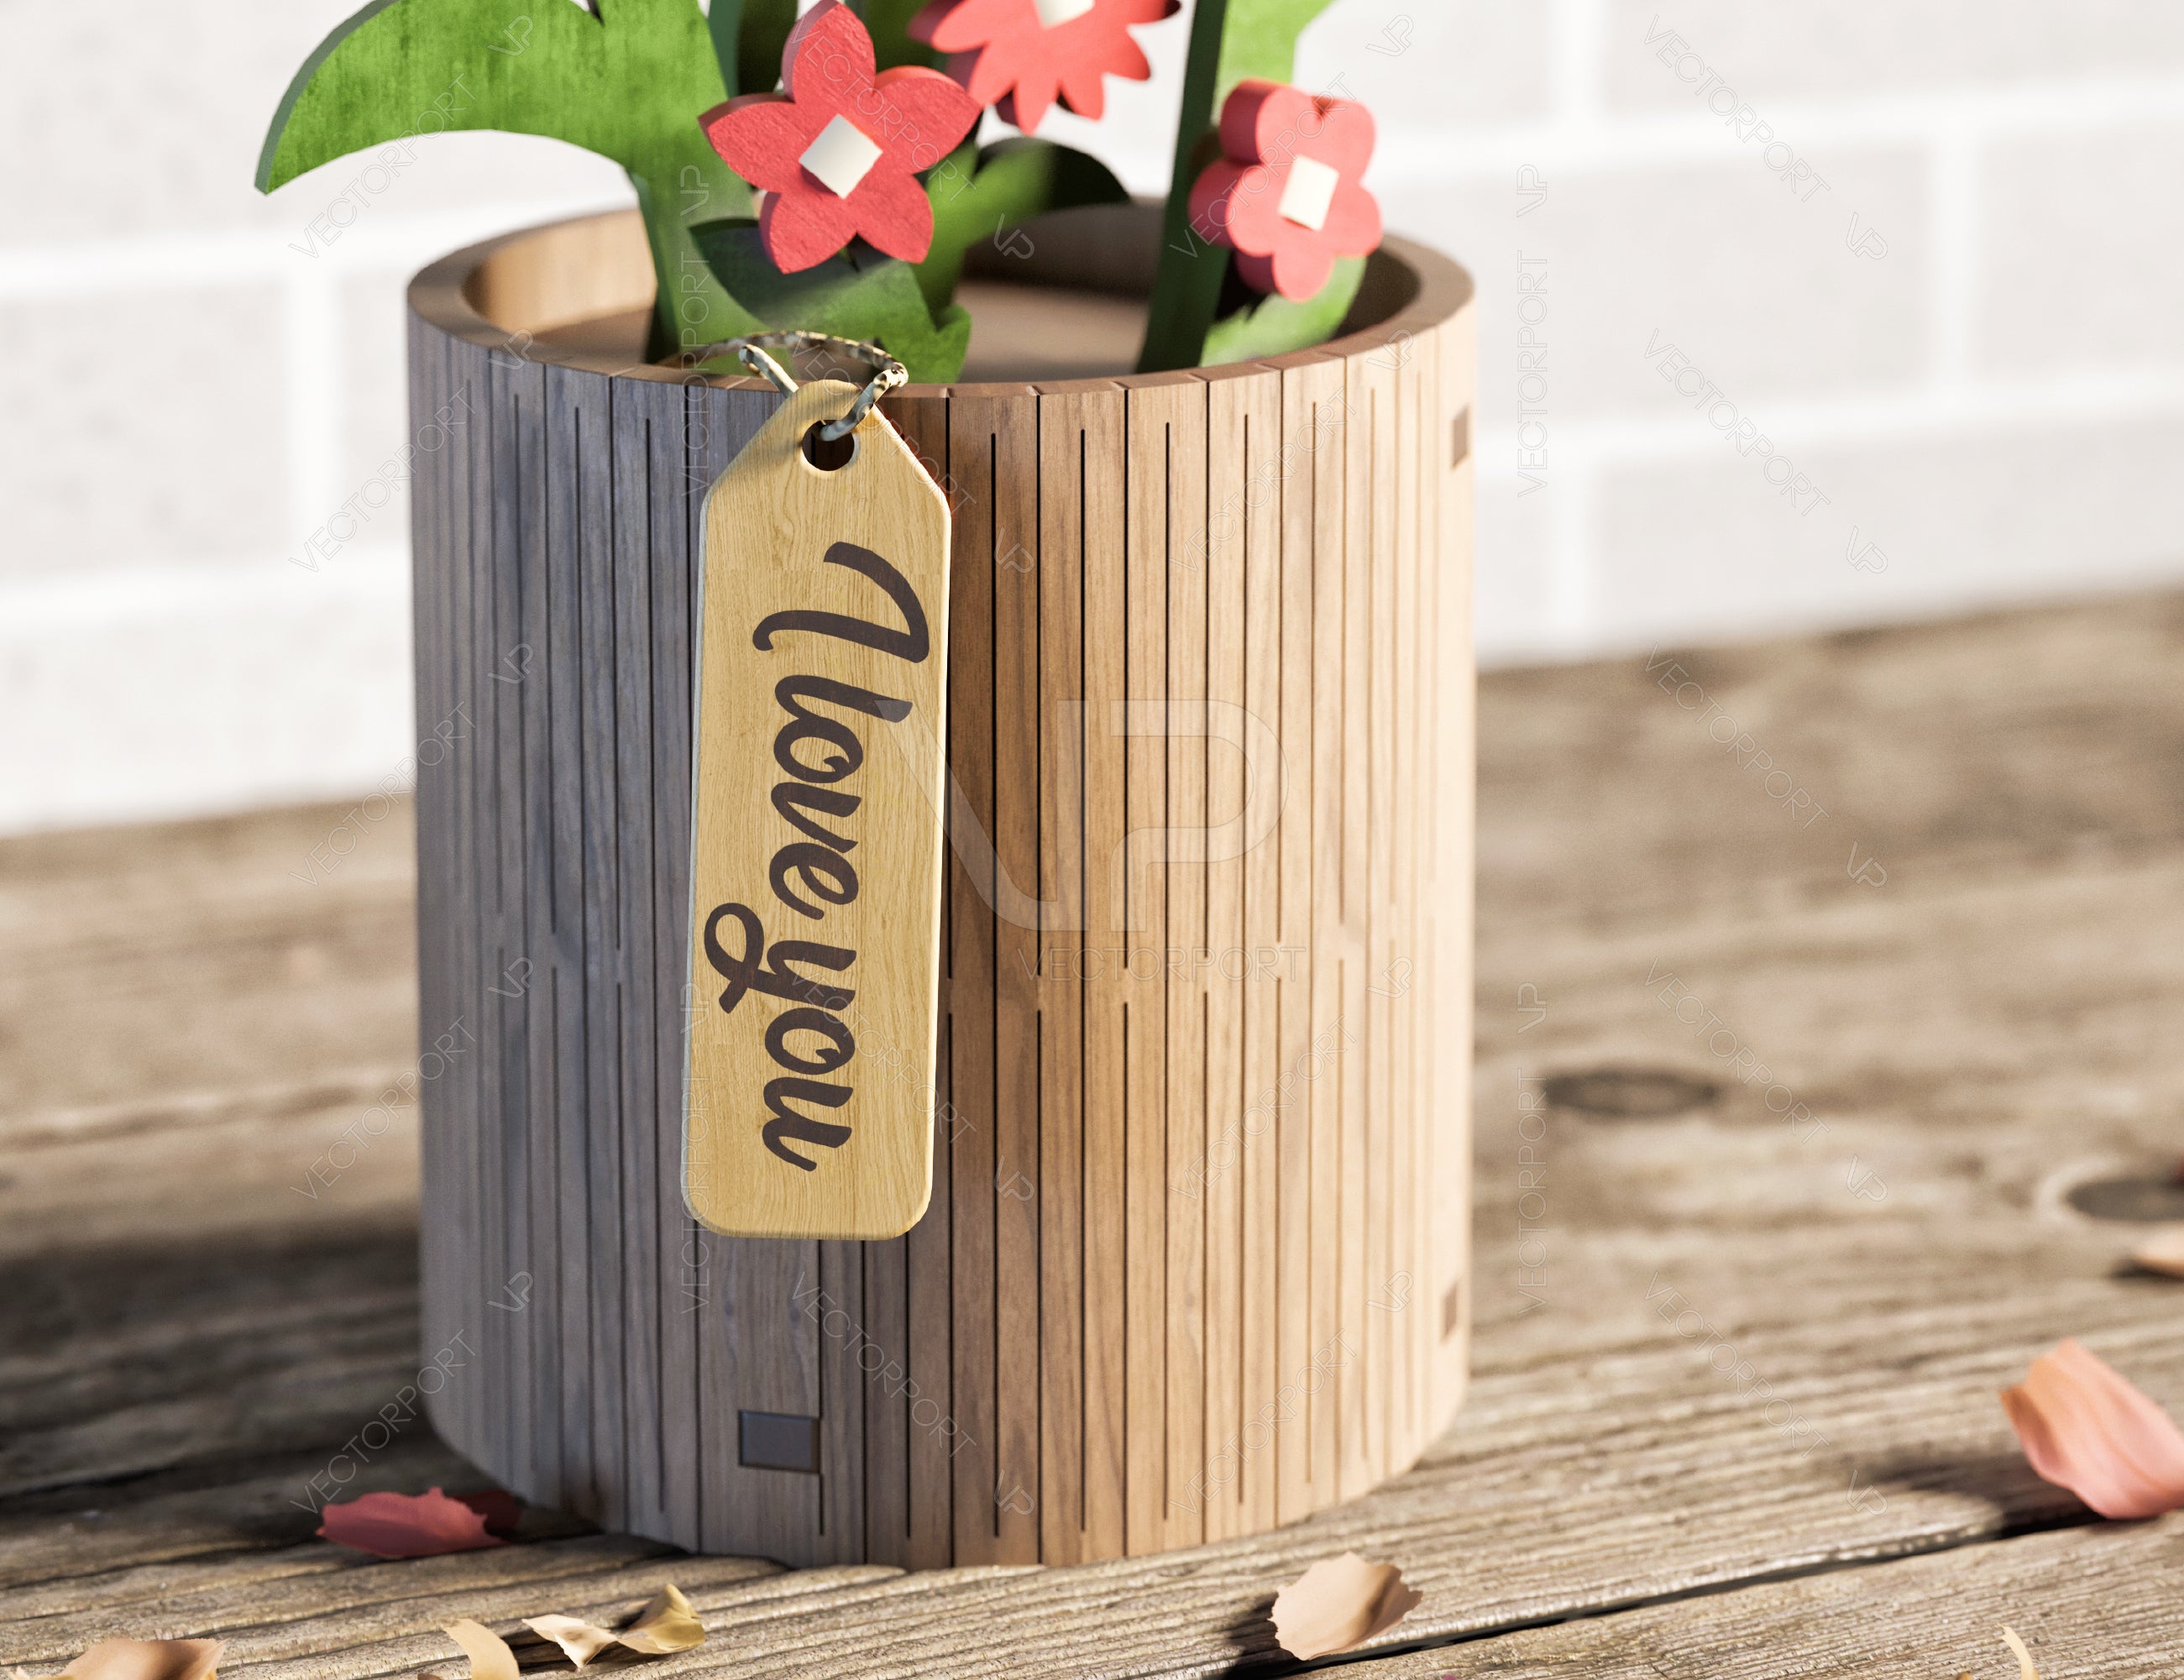 3D Daisy Laser Cut Flower Pot Gift for Valentine, Mother’s Day Wooden Plant Gift for Her Digital Download |#U354|